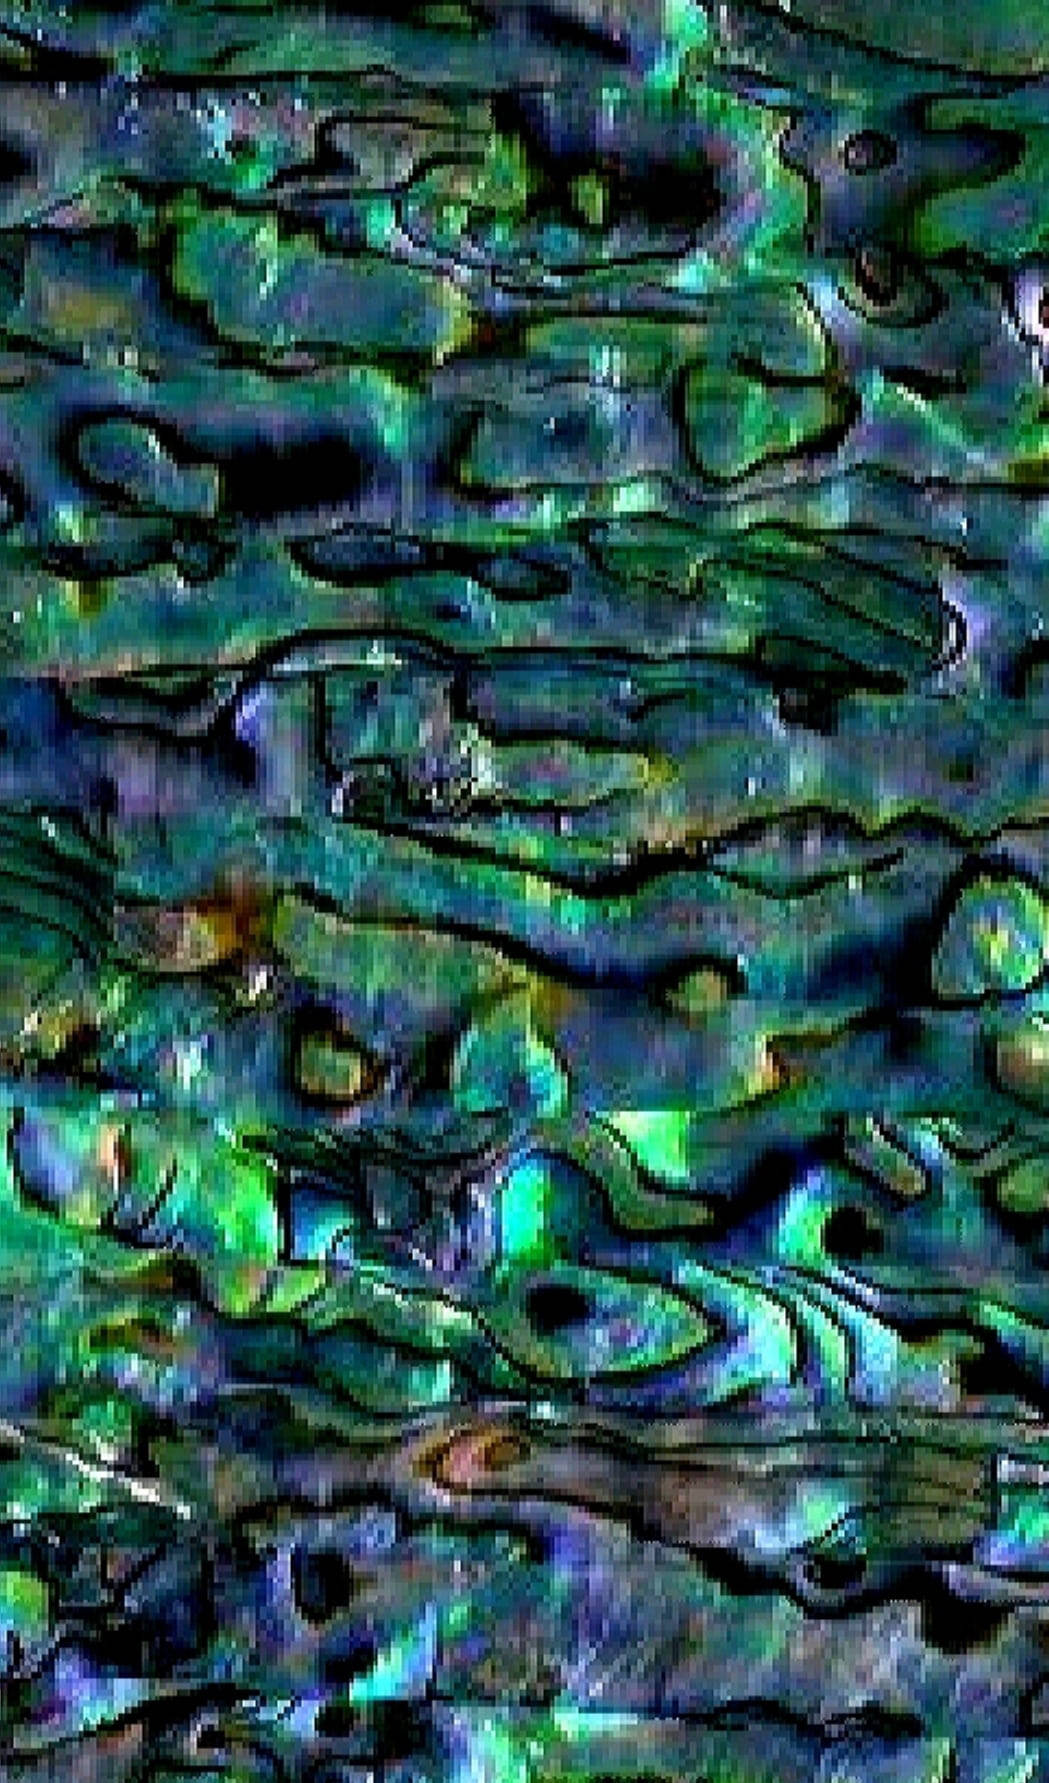 abalone shell texture